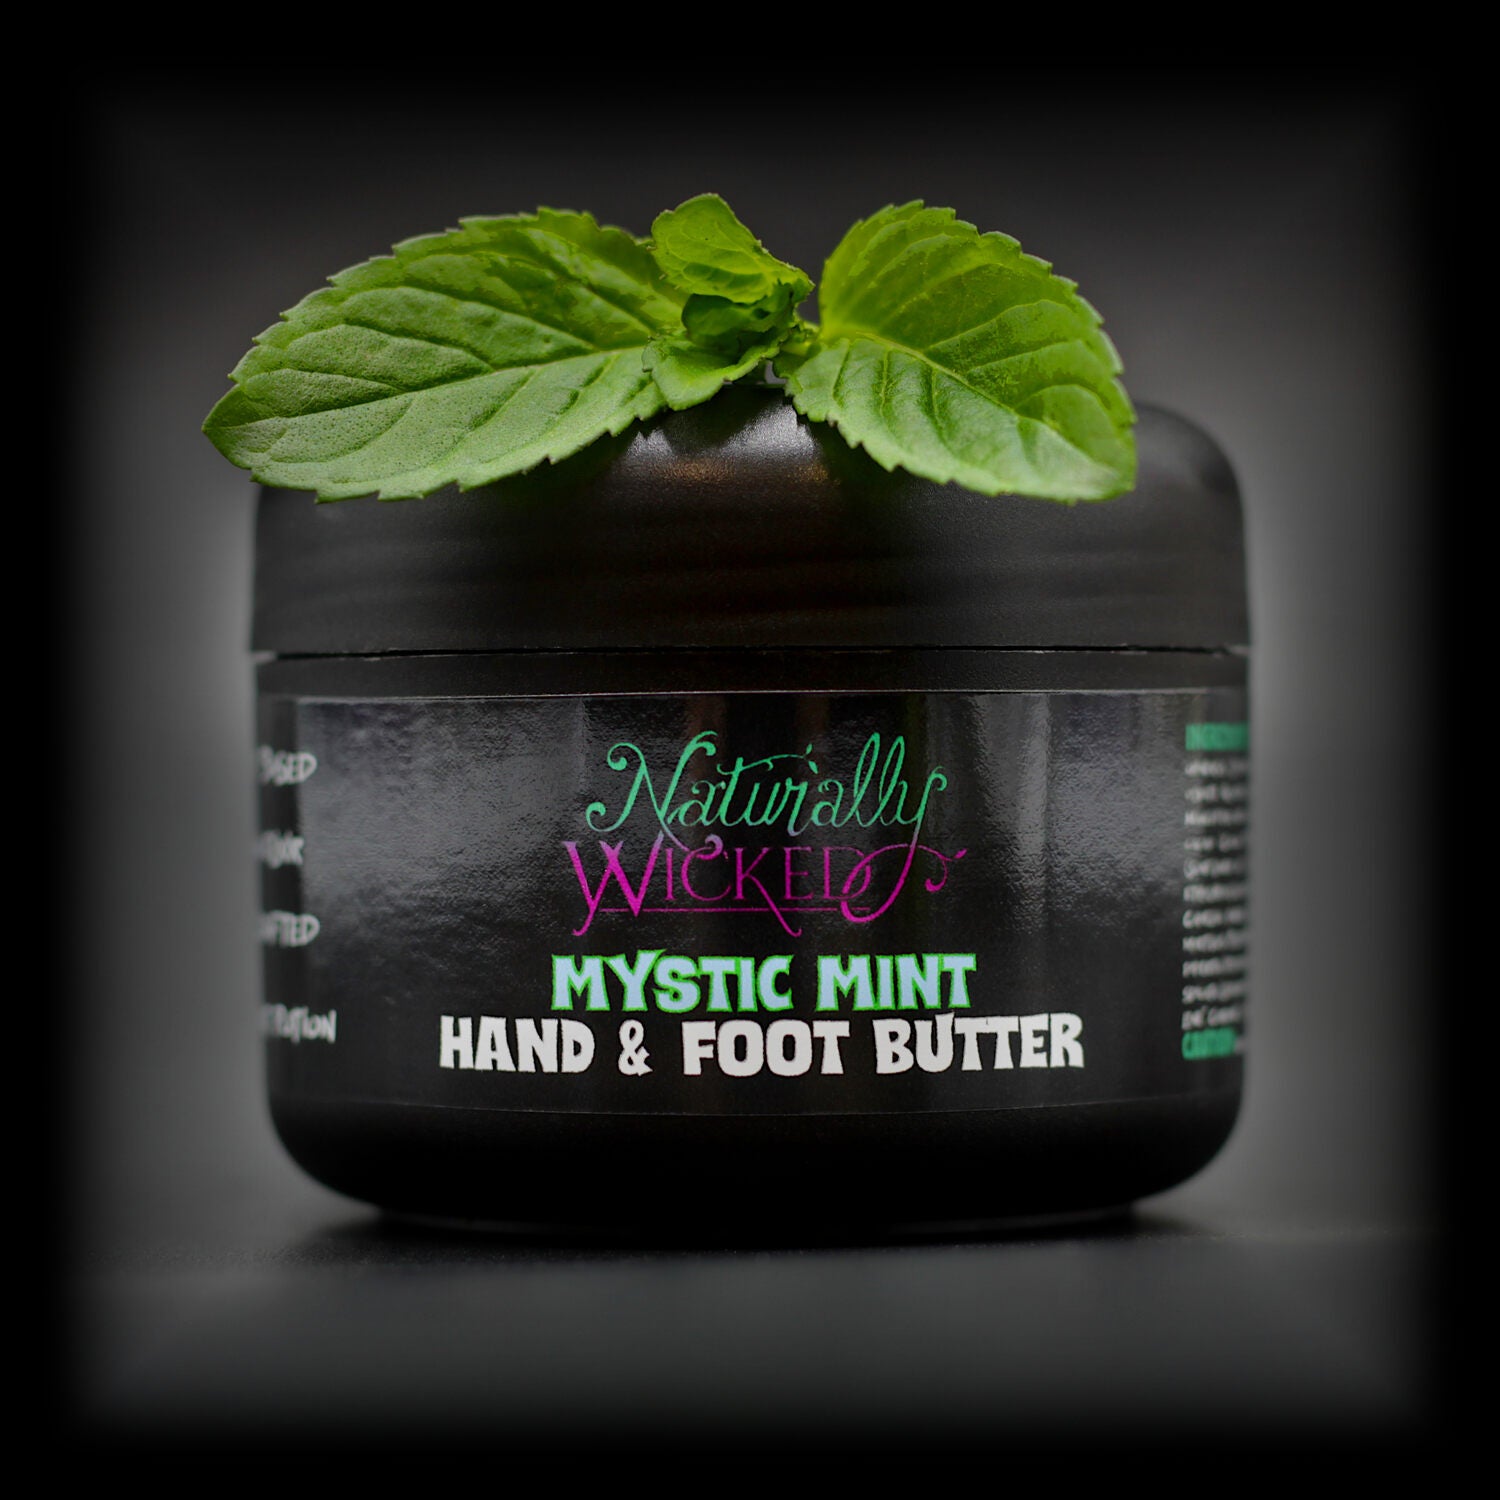 Naturally Wicked Mystic Mint Moisturising Hand & Foot Butter With Vibrant Green Mint Leaves On Top